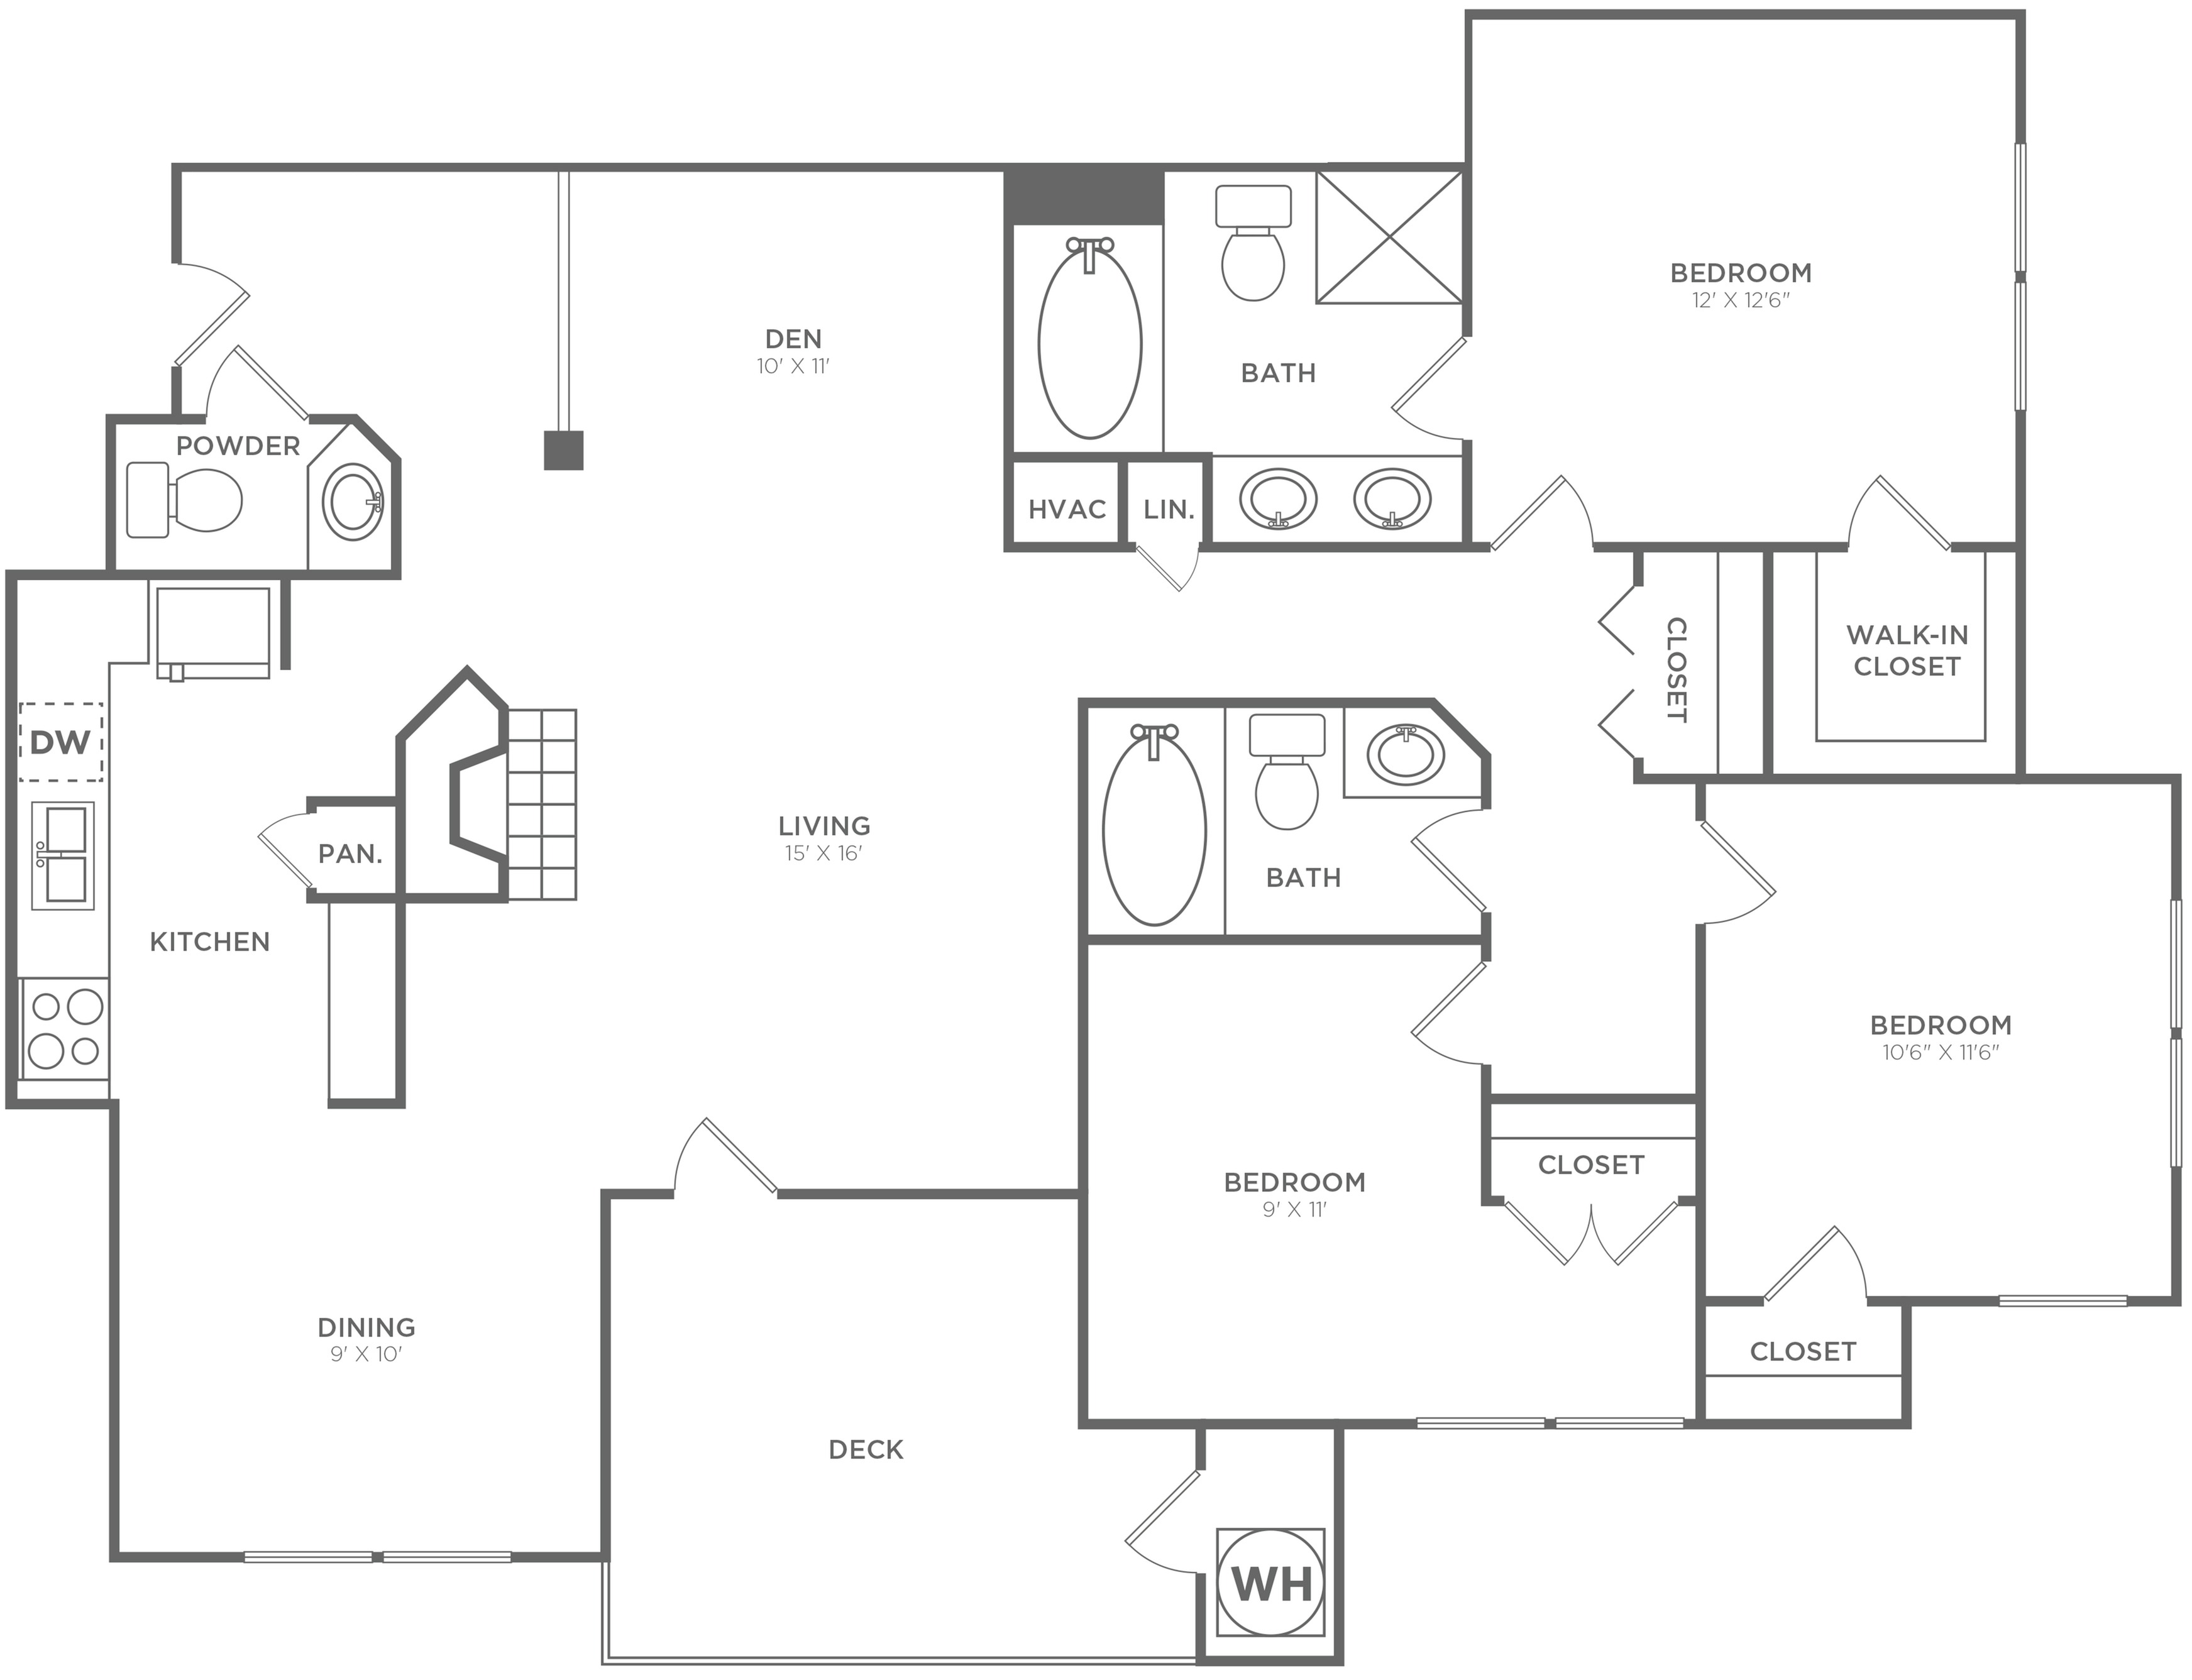 3x2.5 | 1481 SF | Floor plan map for a three bedroom unit at our apartments for rent in Bellevue, featuring labeled rooms with dimensions.